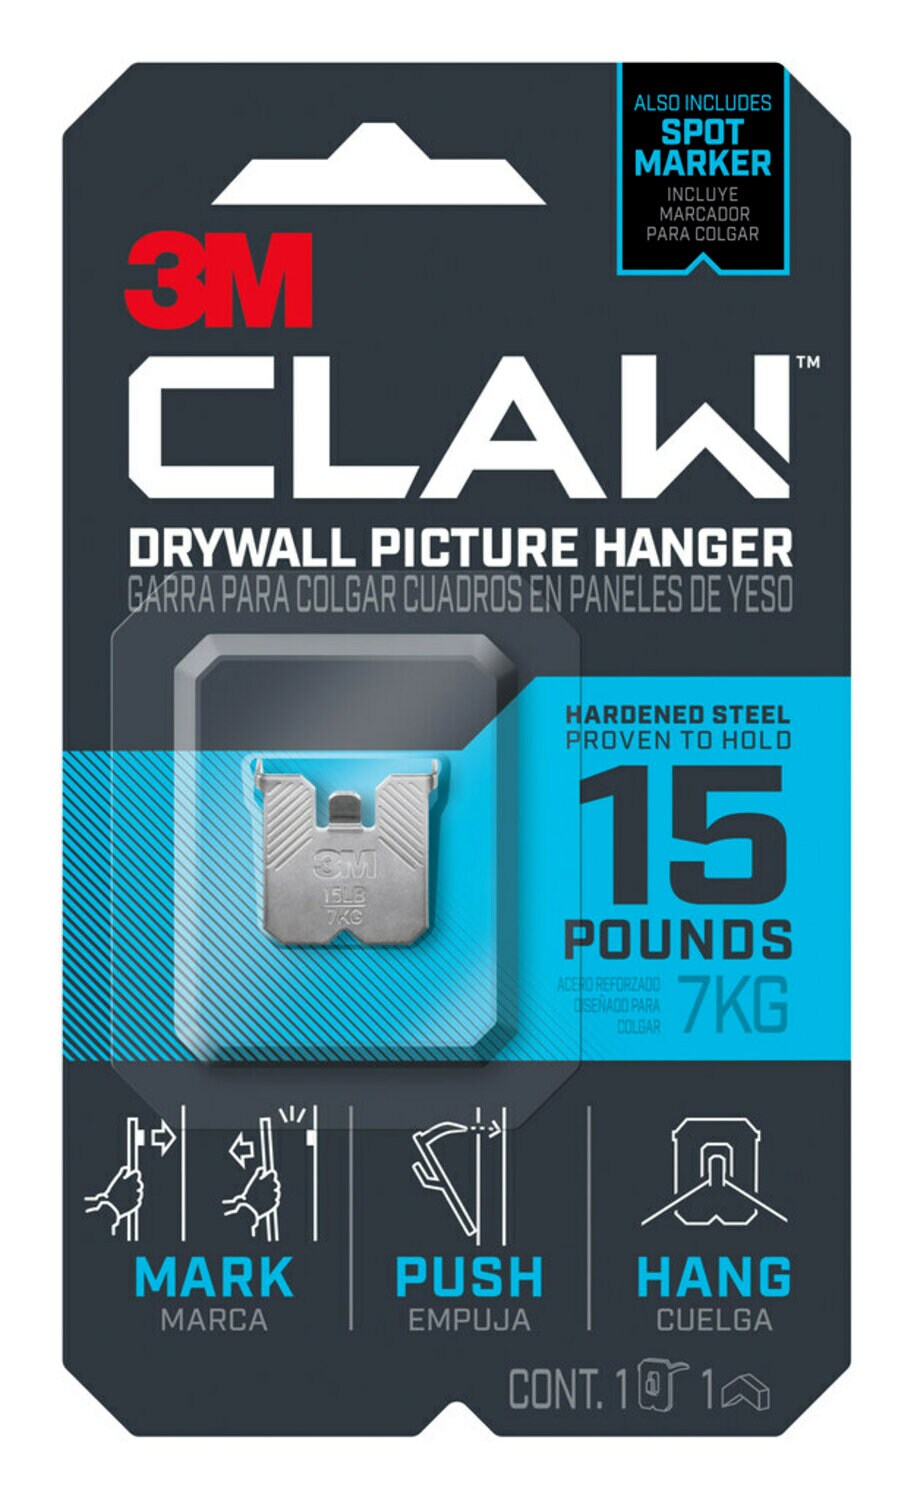 7100220654 - 3M CLAW Drywall Picture Hanger 15 lb with Temporary Spot Marker 3PH15M-1ES, 1 hanger, 1 marker